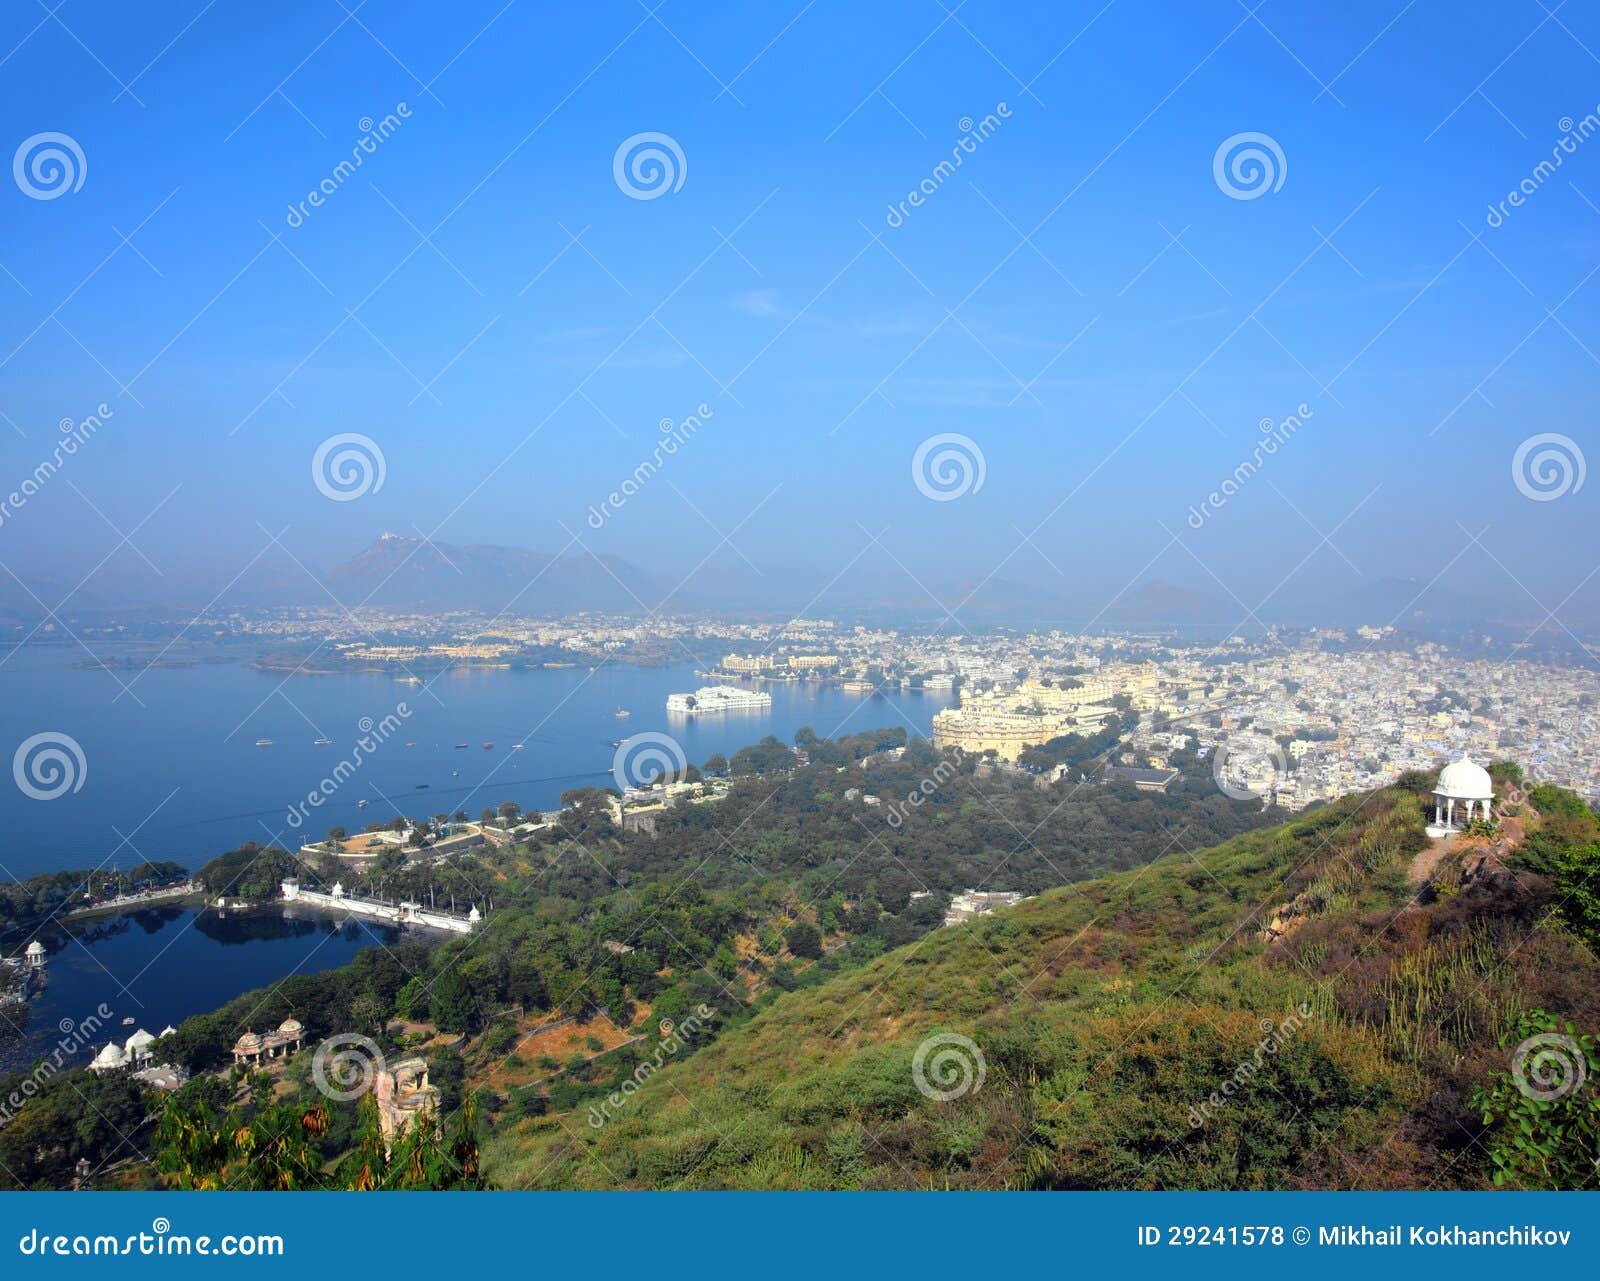 landscape with lake and palaces in udaipur